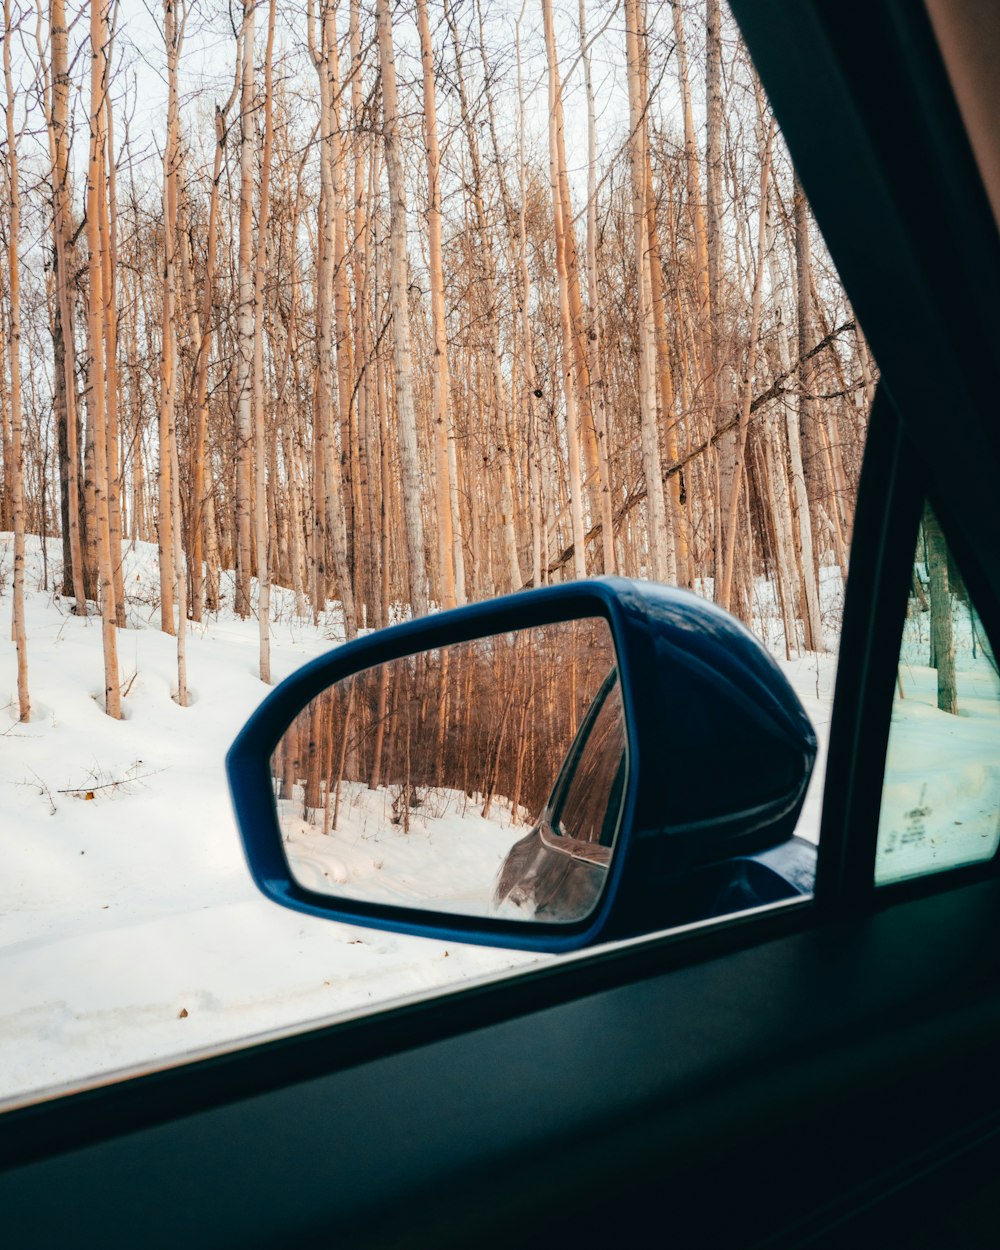 a car's side view mirror on a snowy road